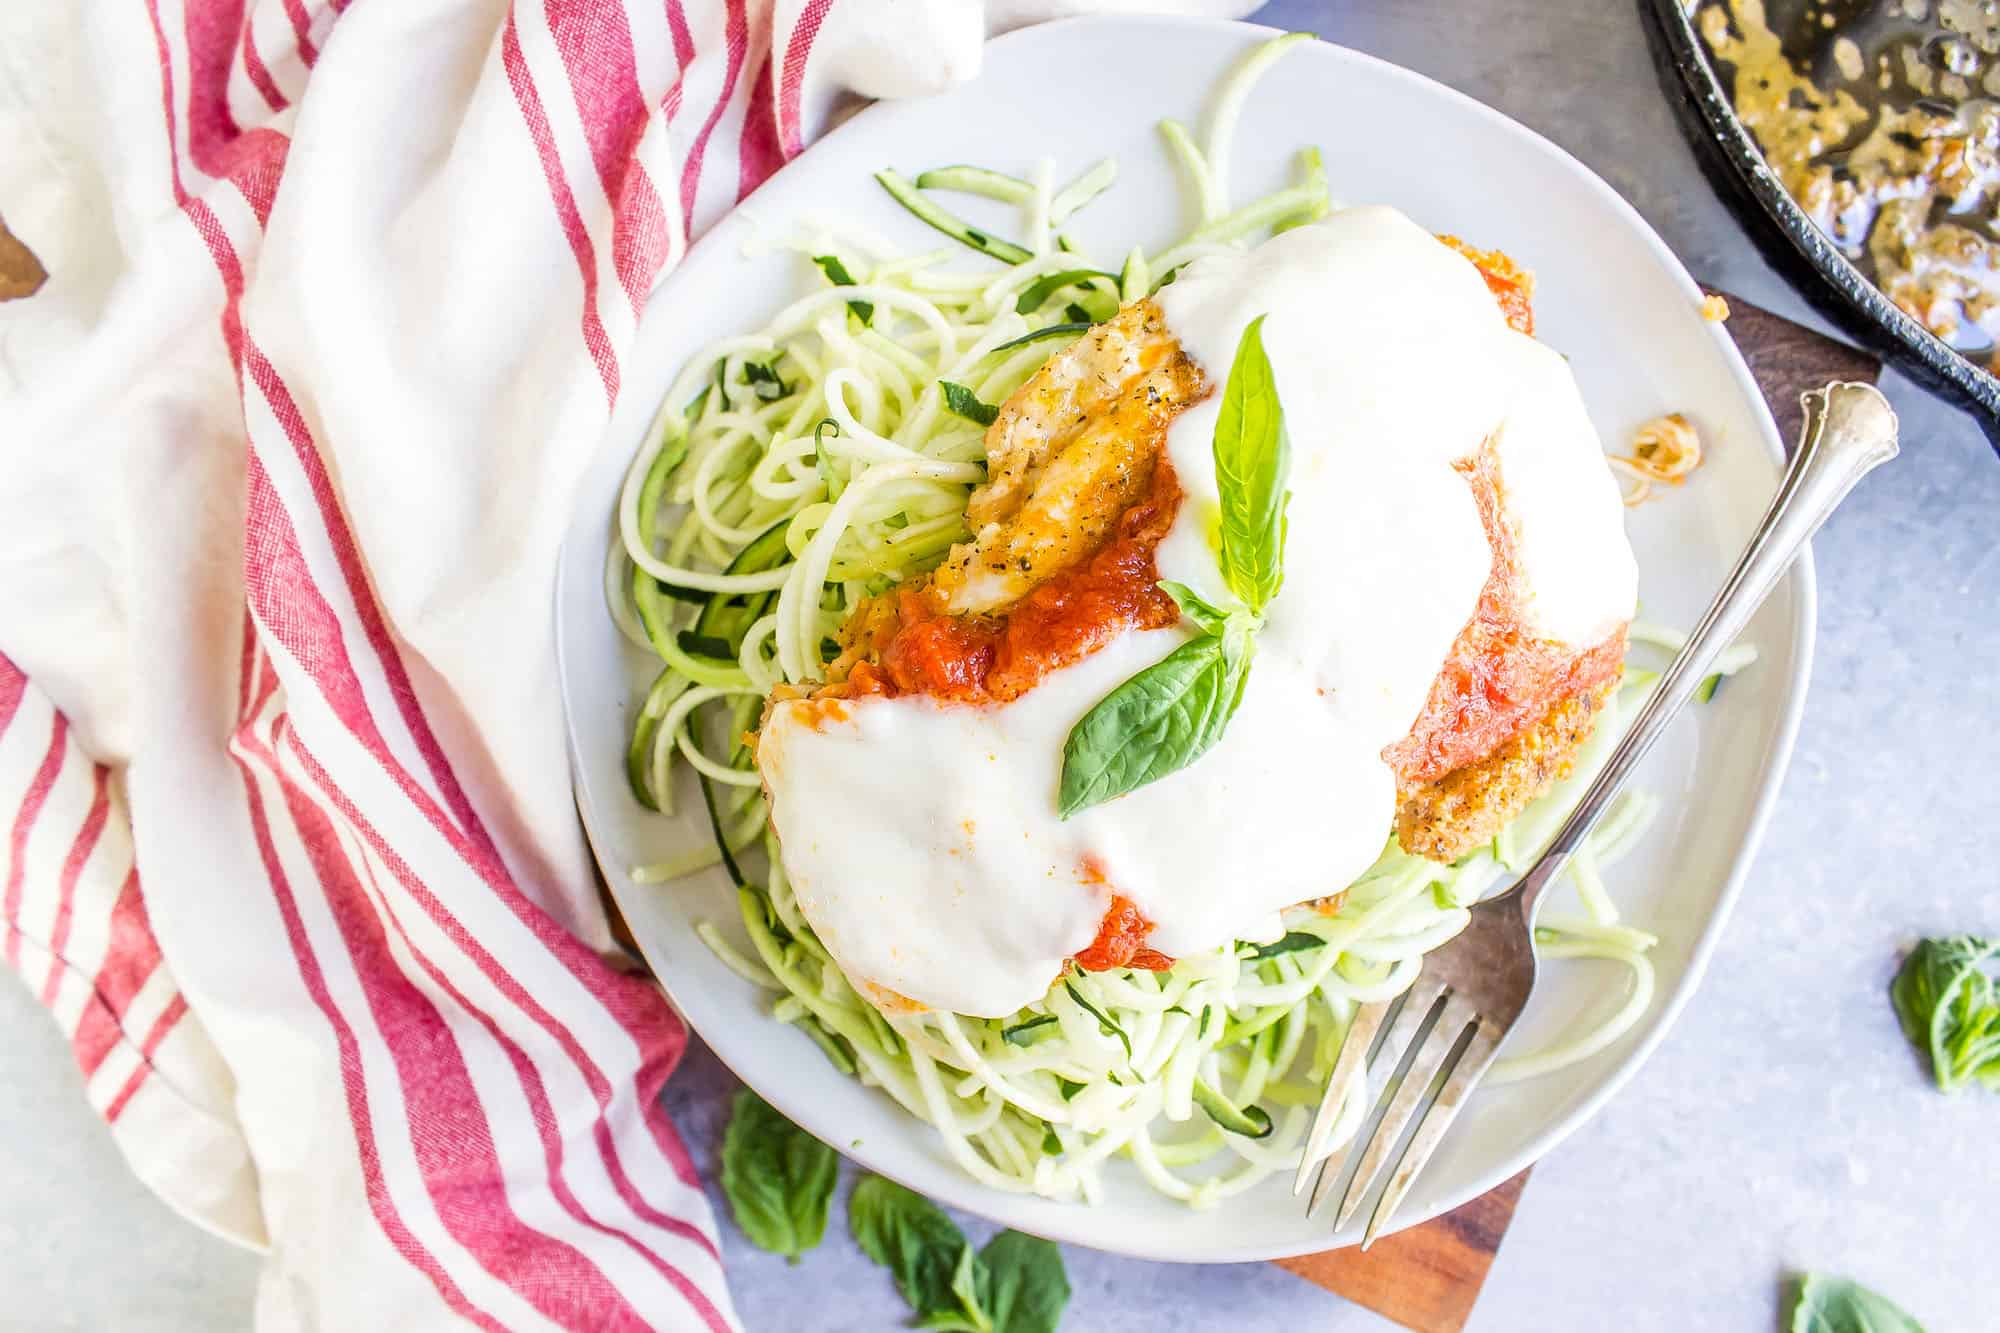 Keto Chicken Parmesan on a bed of zucchini noodles